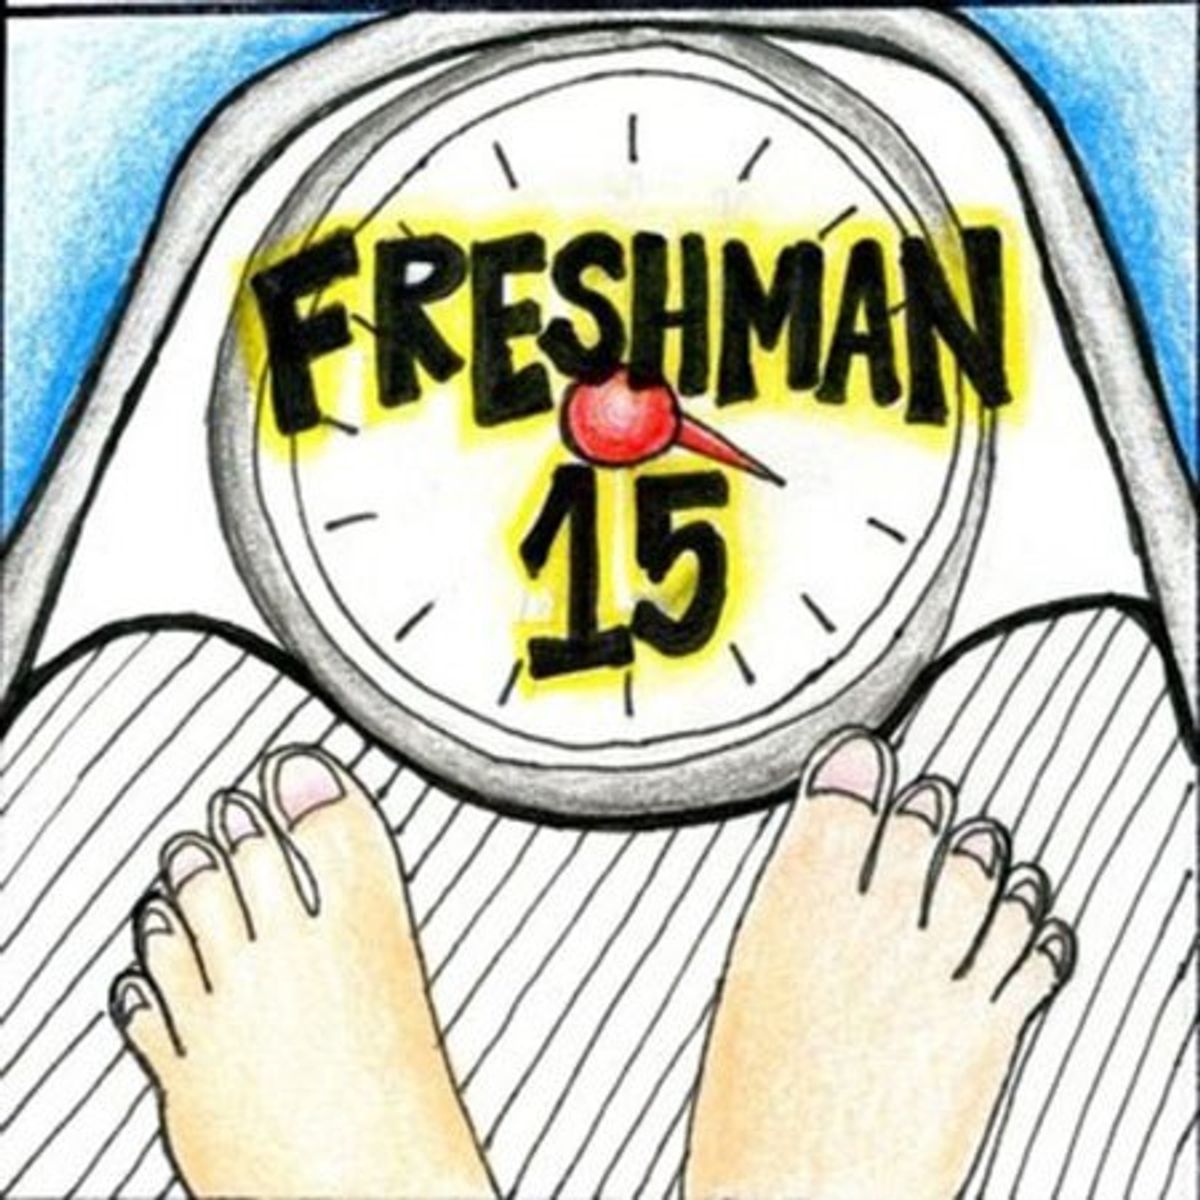 15 Signs That You've Fallen Into The Freshman 15 Trap